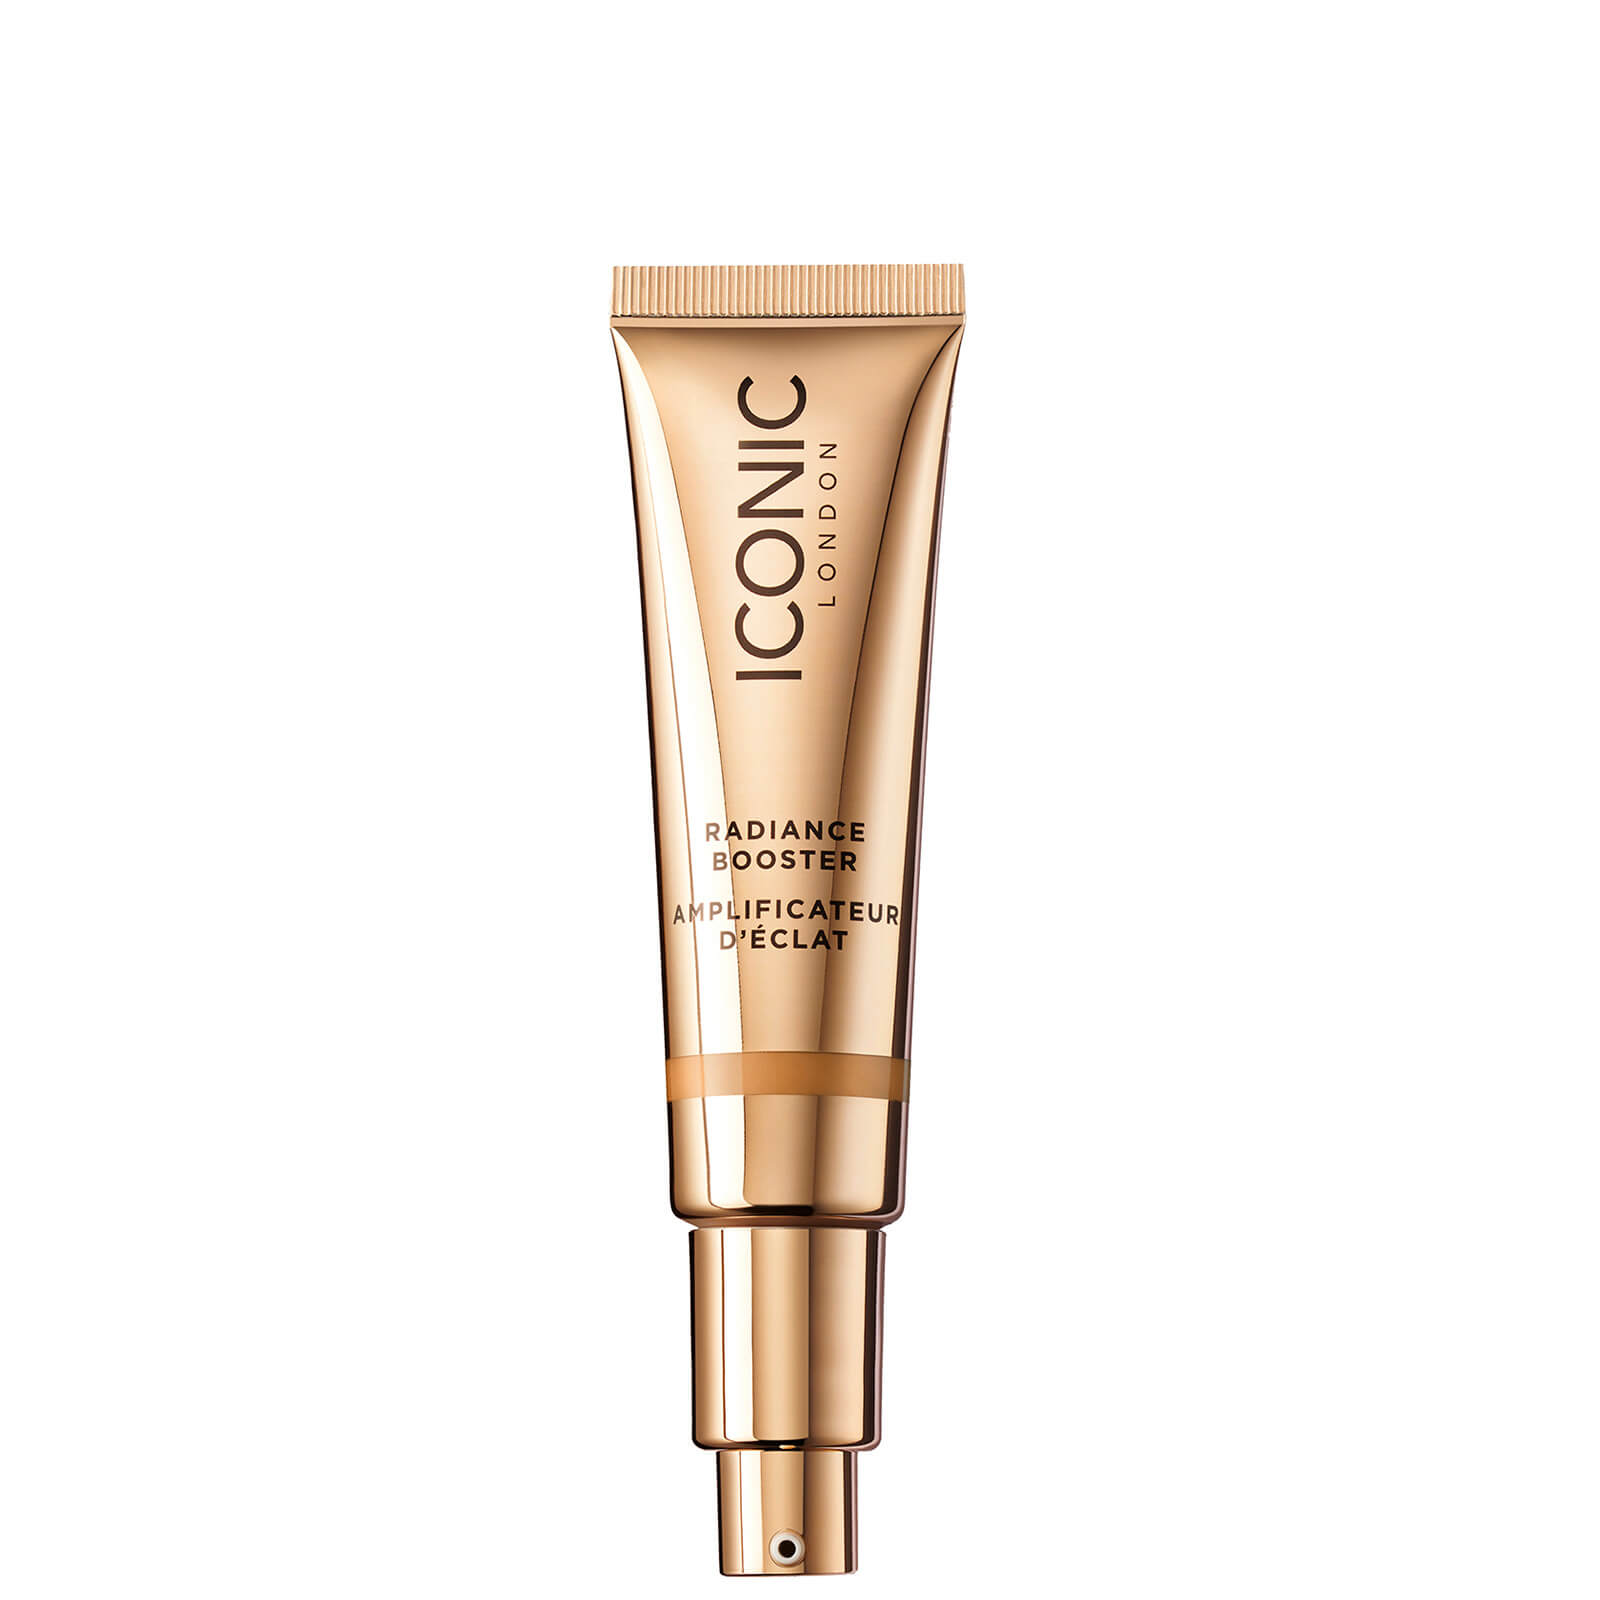 ICONIC London Radiance Booster 30ml (Various Shades) - Tan Glow